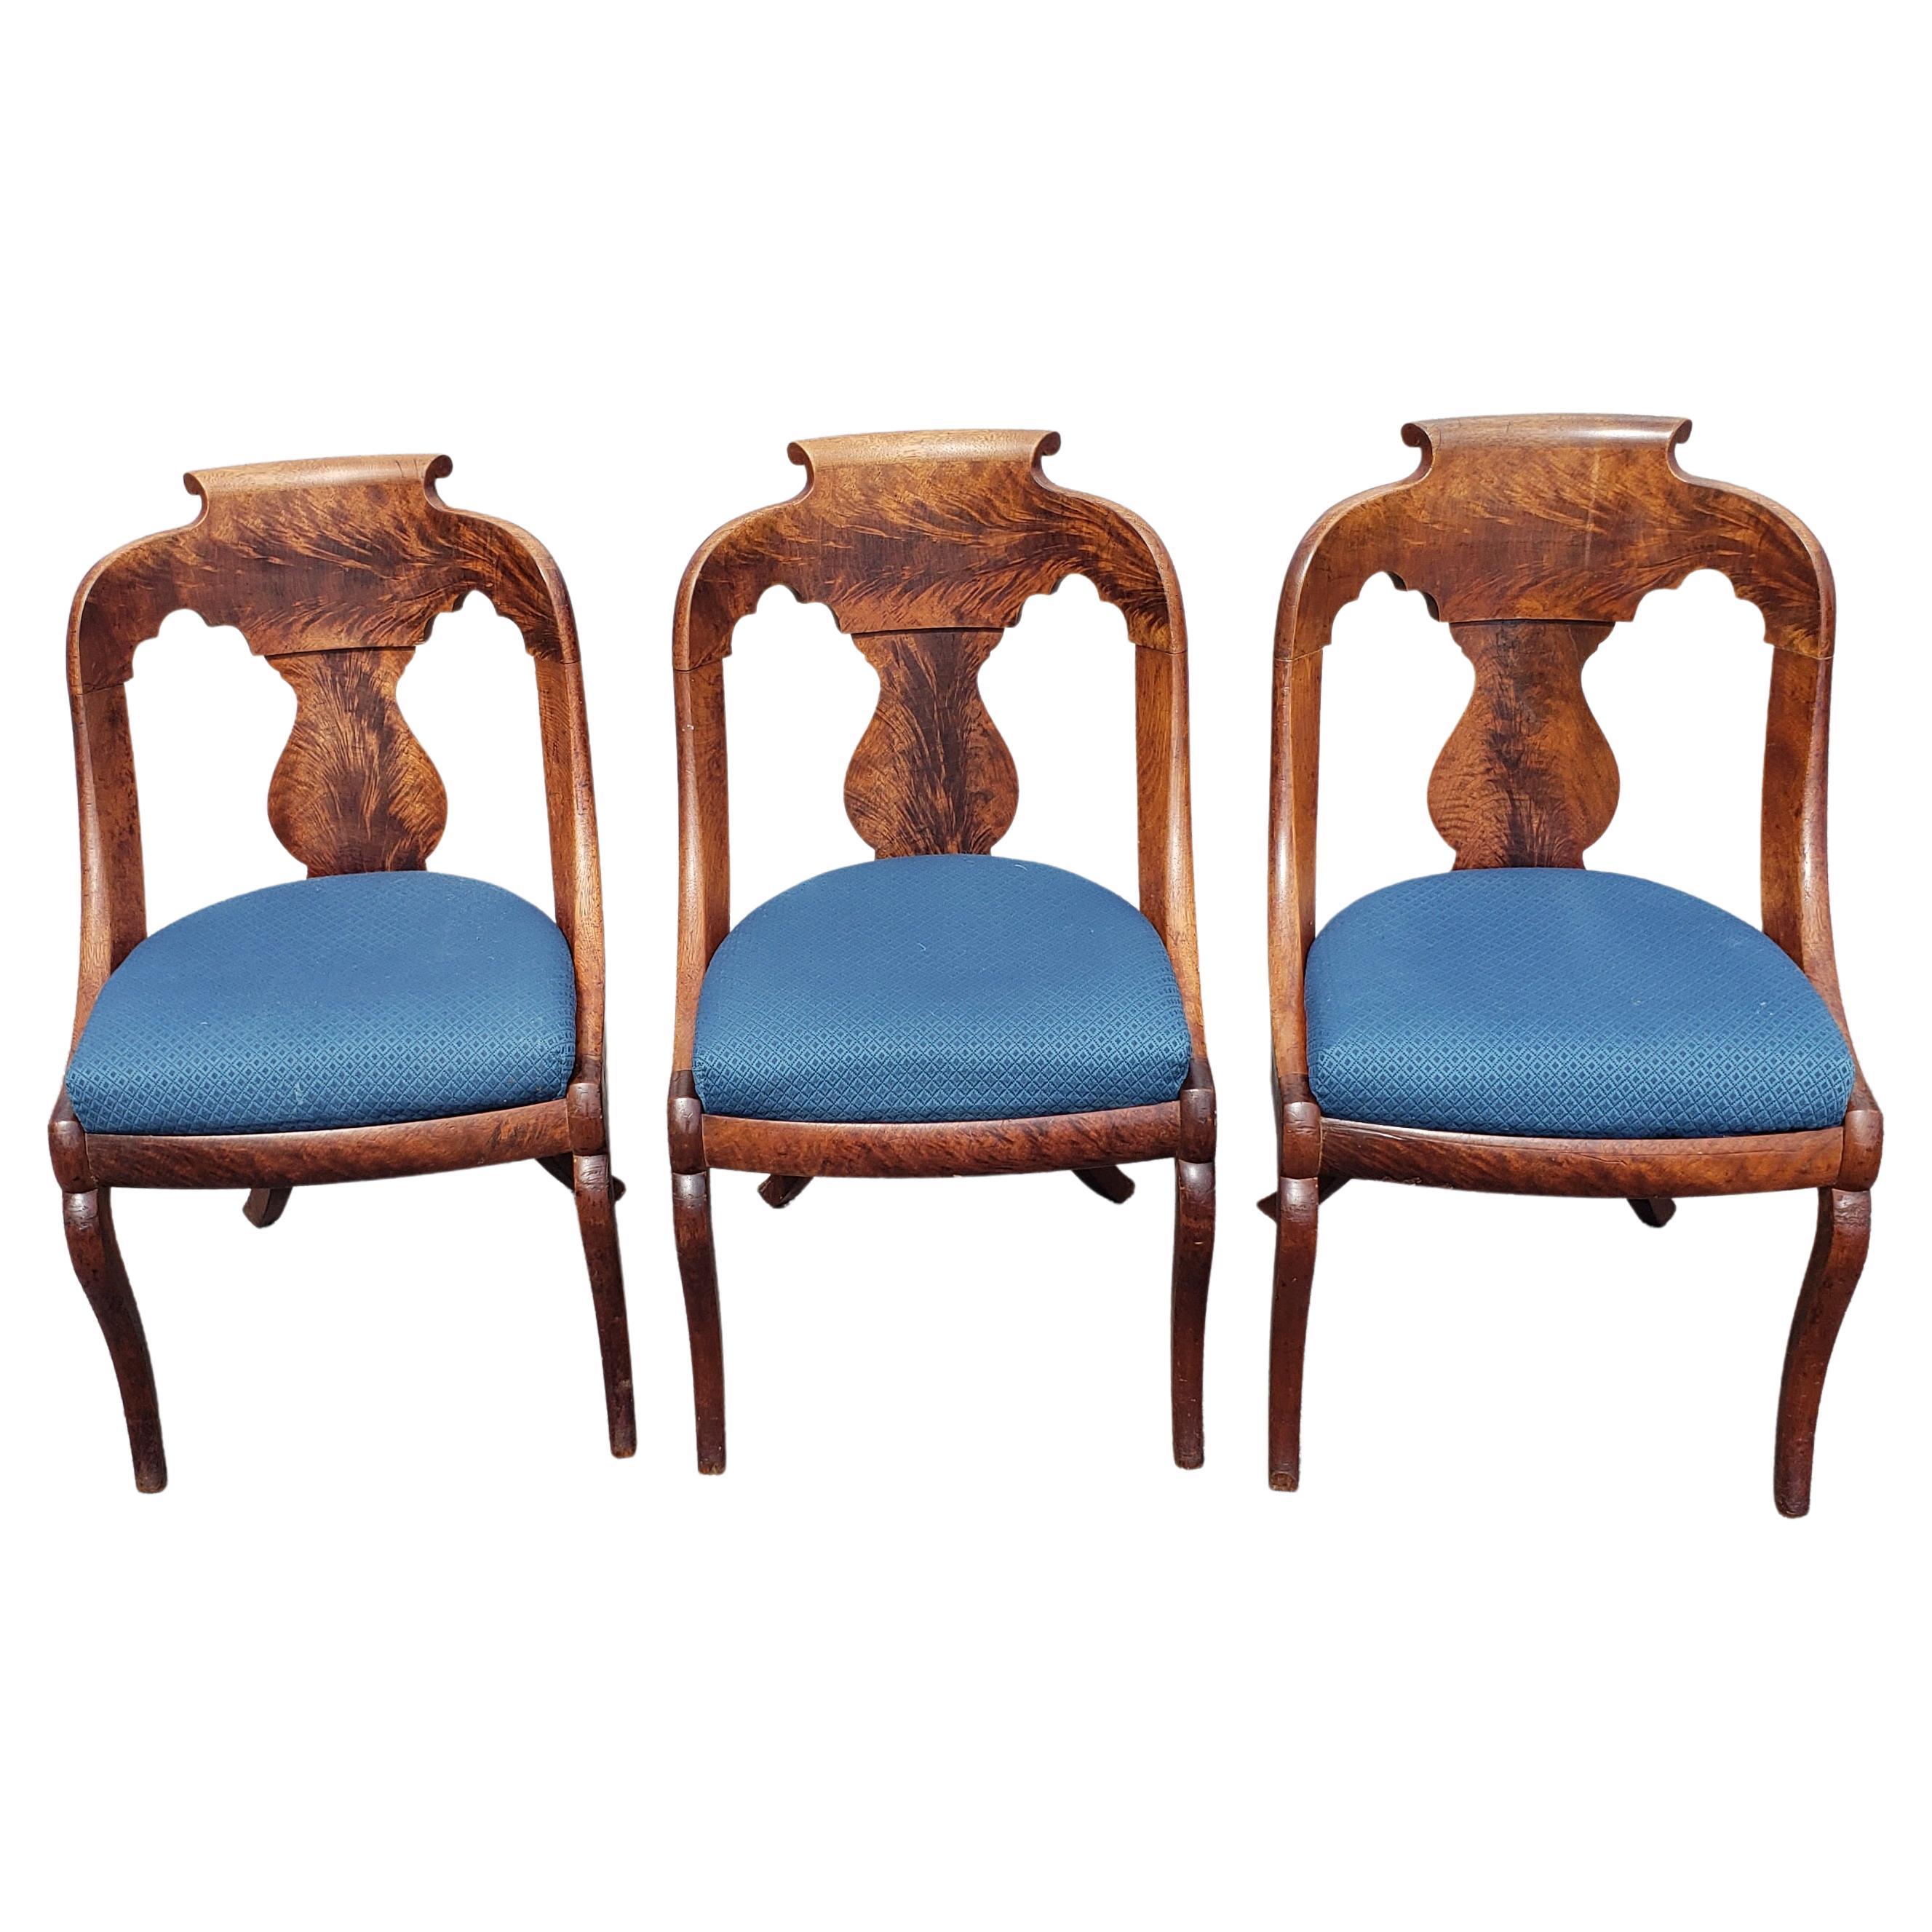 Exceptional set of 3 American empire Boston girandole chairs. This very rare chairs in today's market was handcrafted out of top grain flame mahogany in mid 1800s. These grandiose chairs evolved from French Empire designs and were made only in the